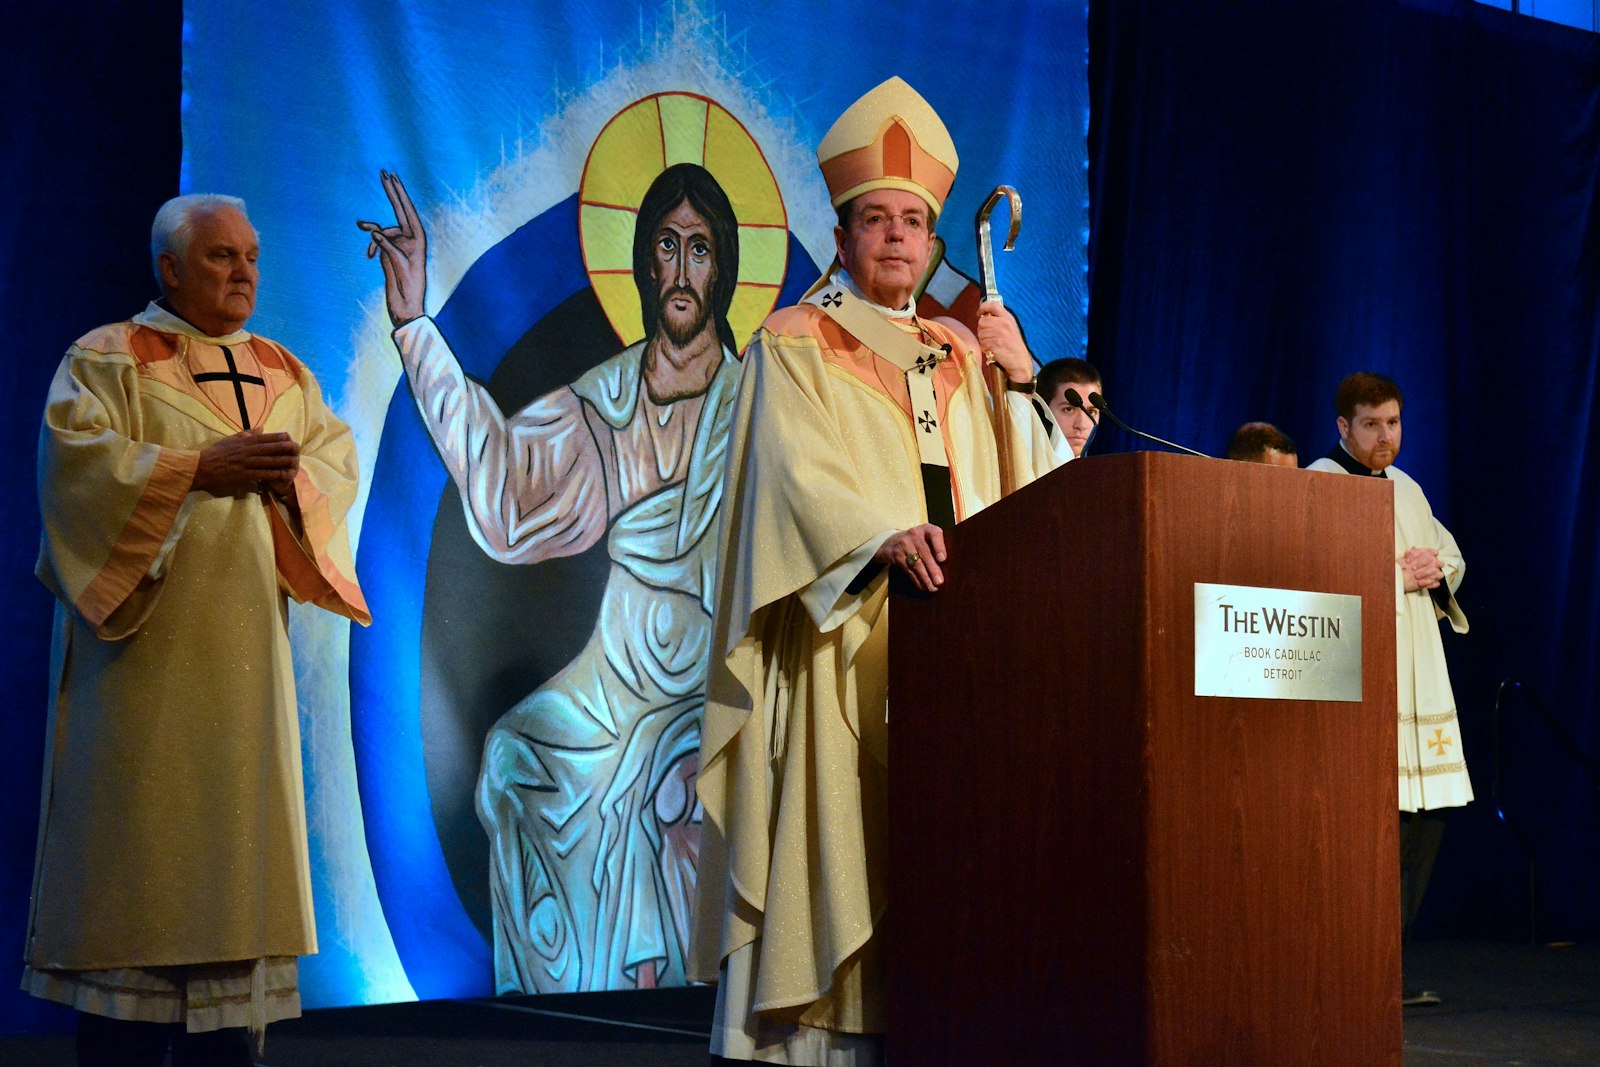 Archbishop Vigneron presides over the opening session of Synod 16 at the Westin Book Cadillac on Nov. 18, 2016. The archbishop's pastoral letter, "Unleash the Gospel," which has become a foundational blueprint for the local Church, is "a record of the graces of the synod," the archbishop said. (Michael Stechschulte | Detroit Catholic file photo)